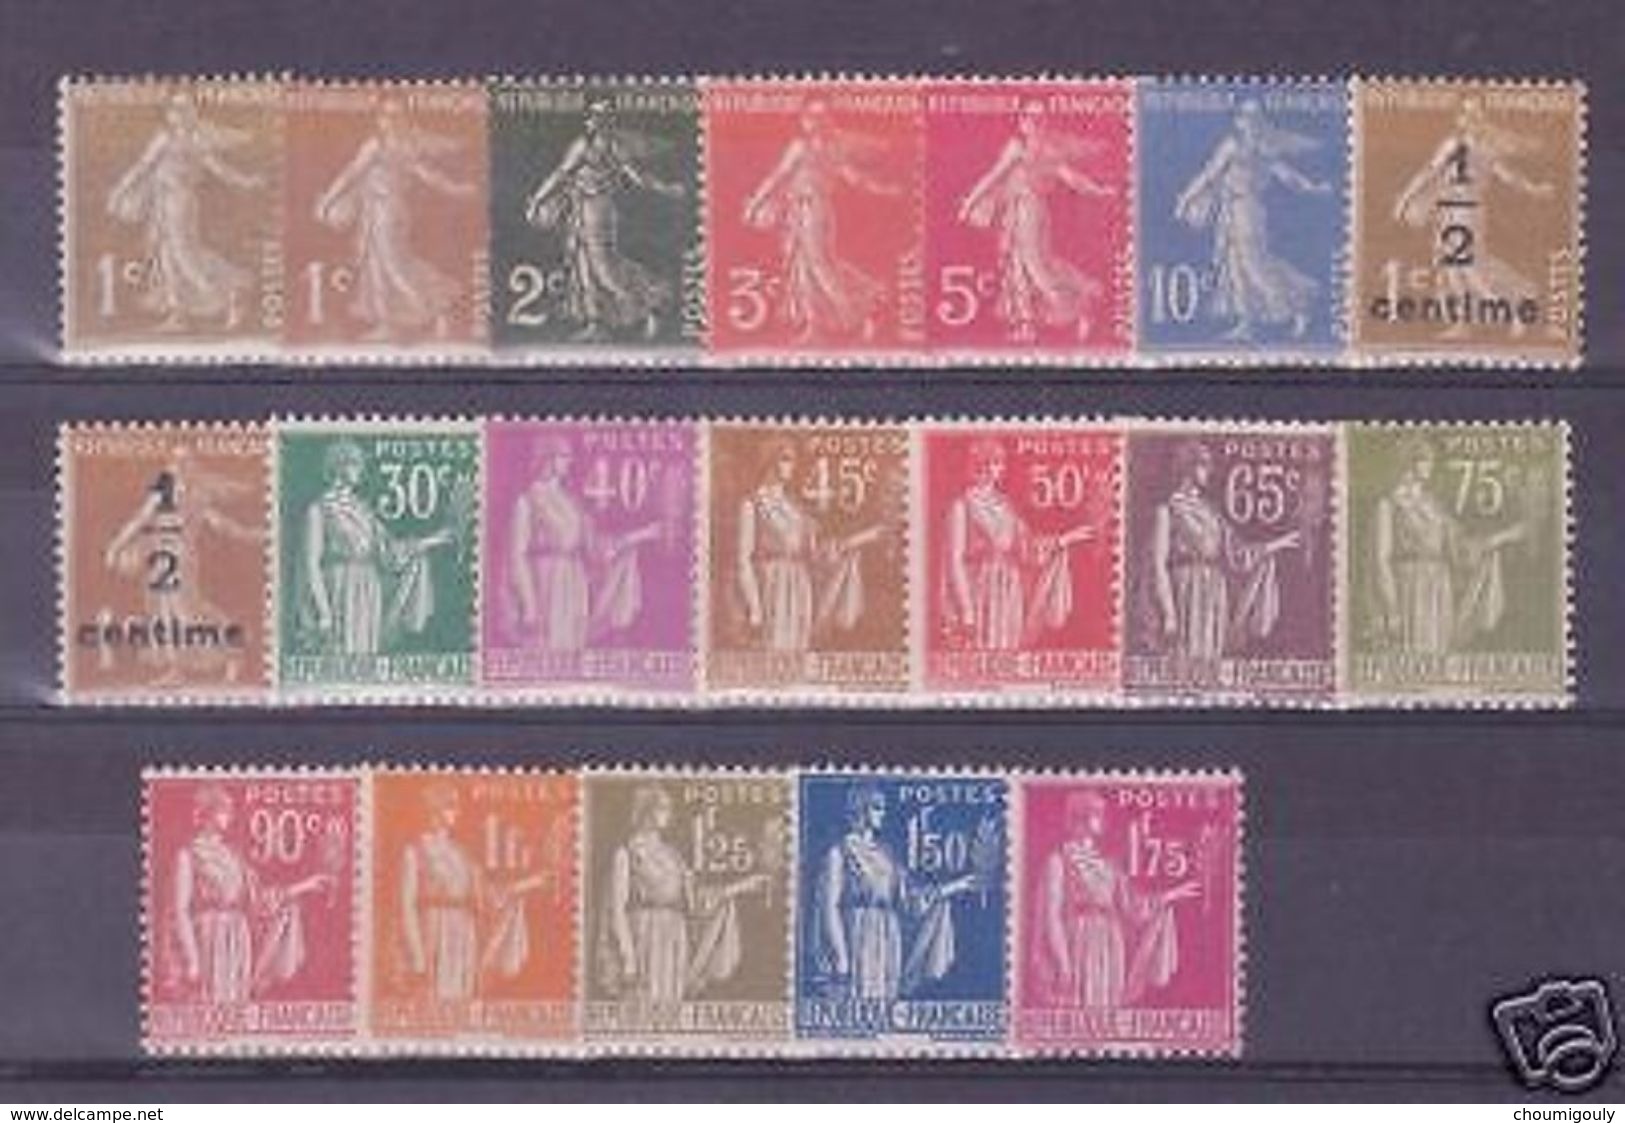 FRANCE STAMP TIMBRE YVERT 277A / 289 ANNEE COMPLETE 1932 NEUVE Xx LUXE - ....-1939